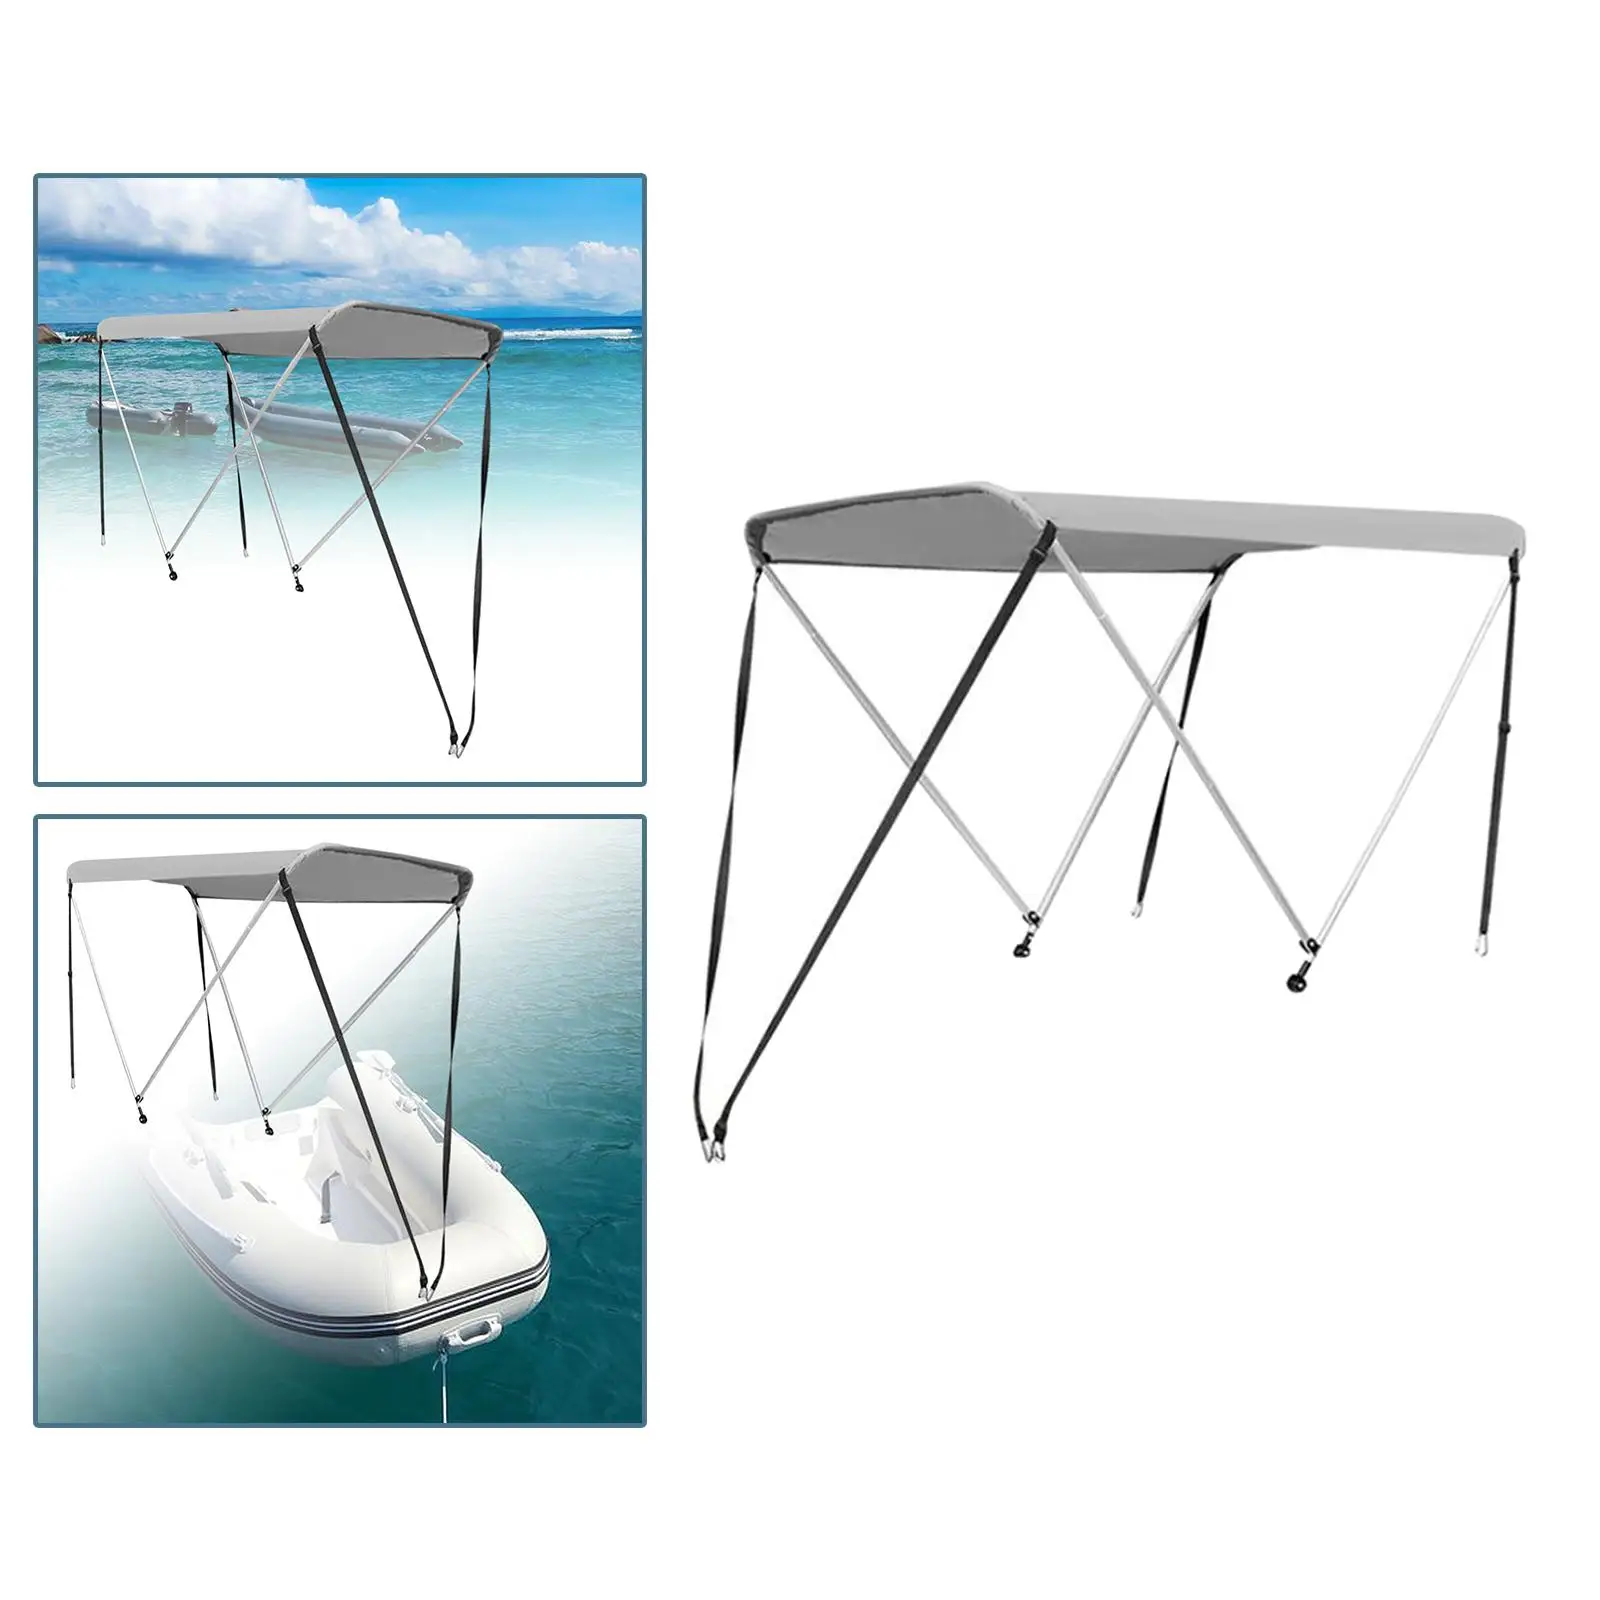 Inflatable Boat Canopy  Sailboat- Dinghy  with Support Rod